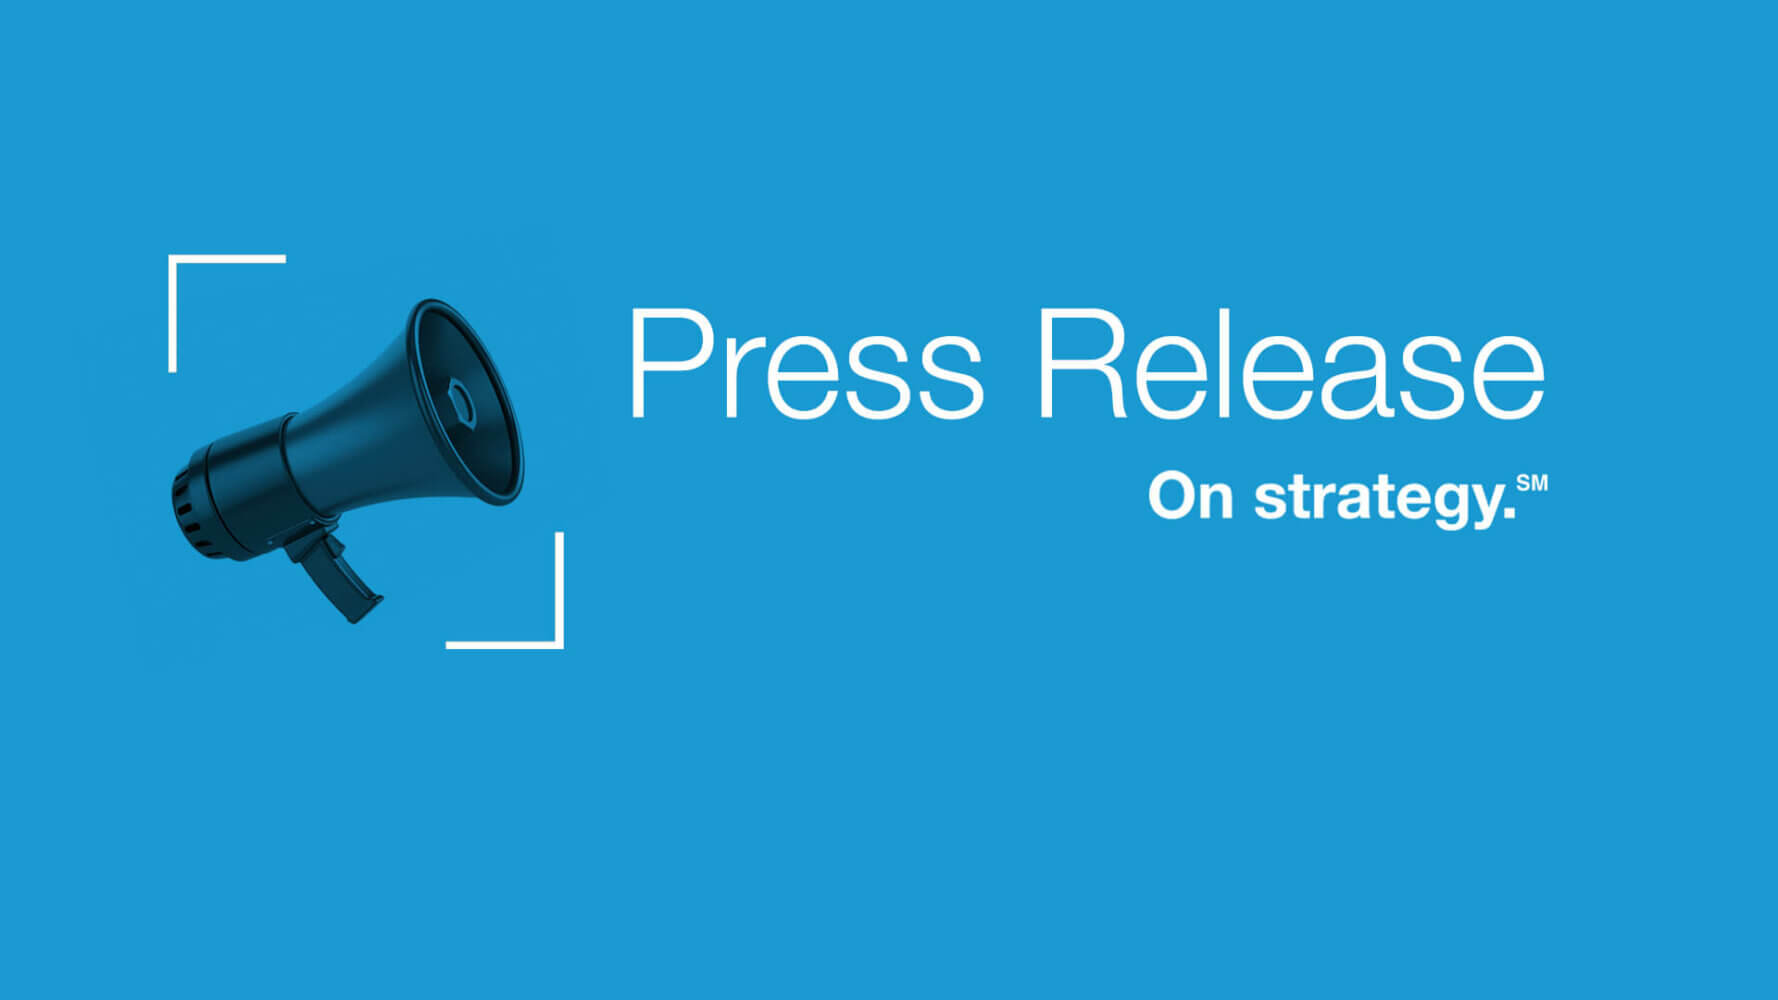 Press Release, On Strategy